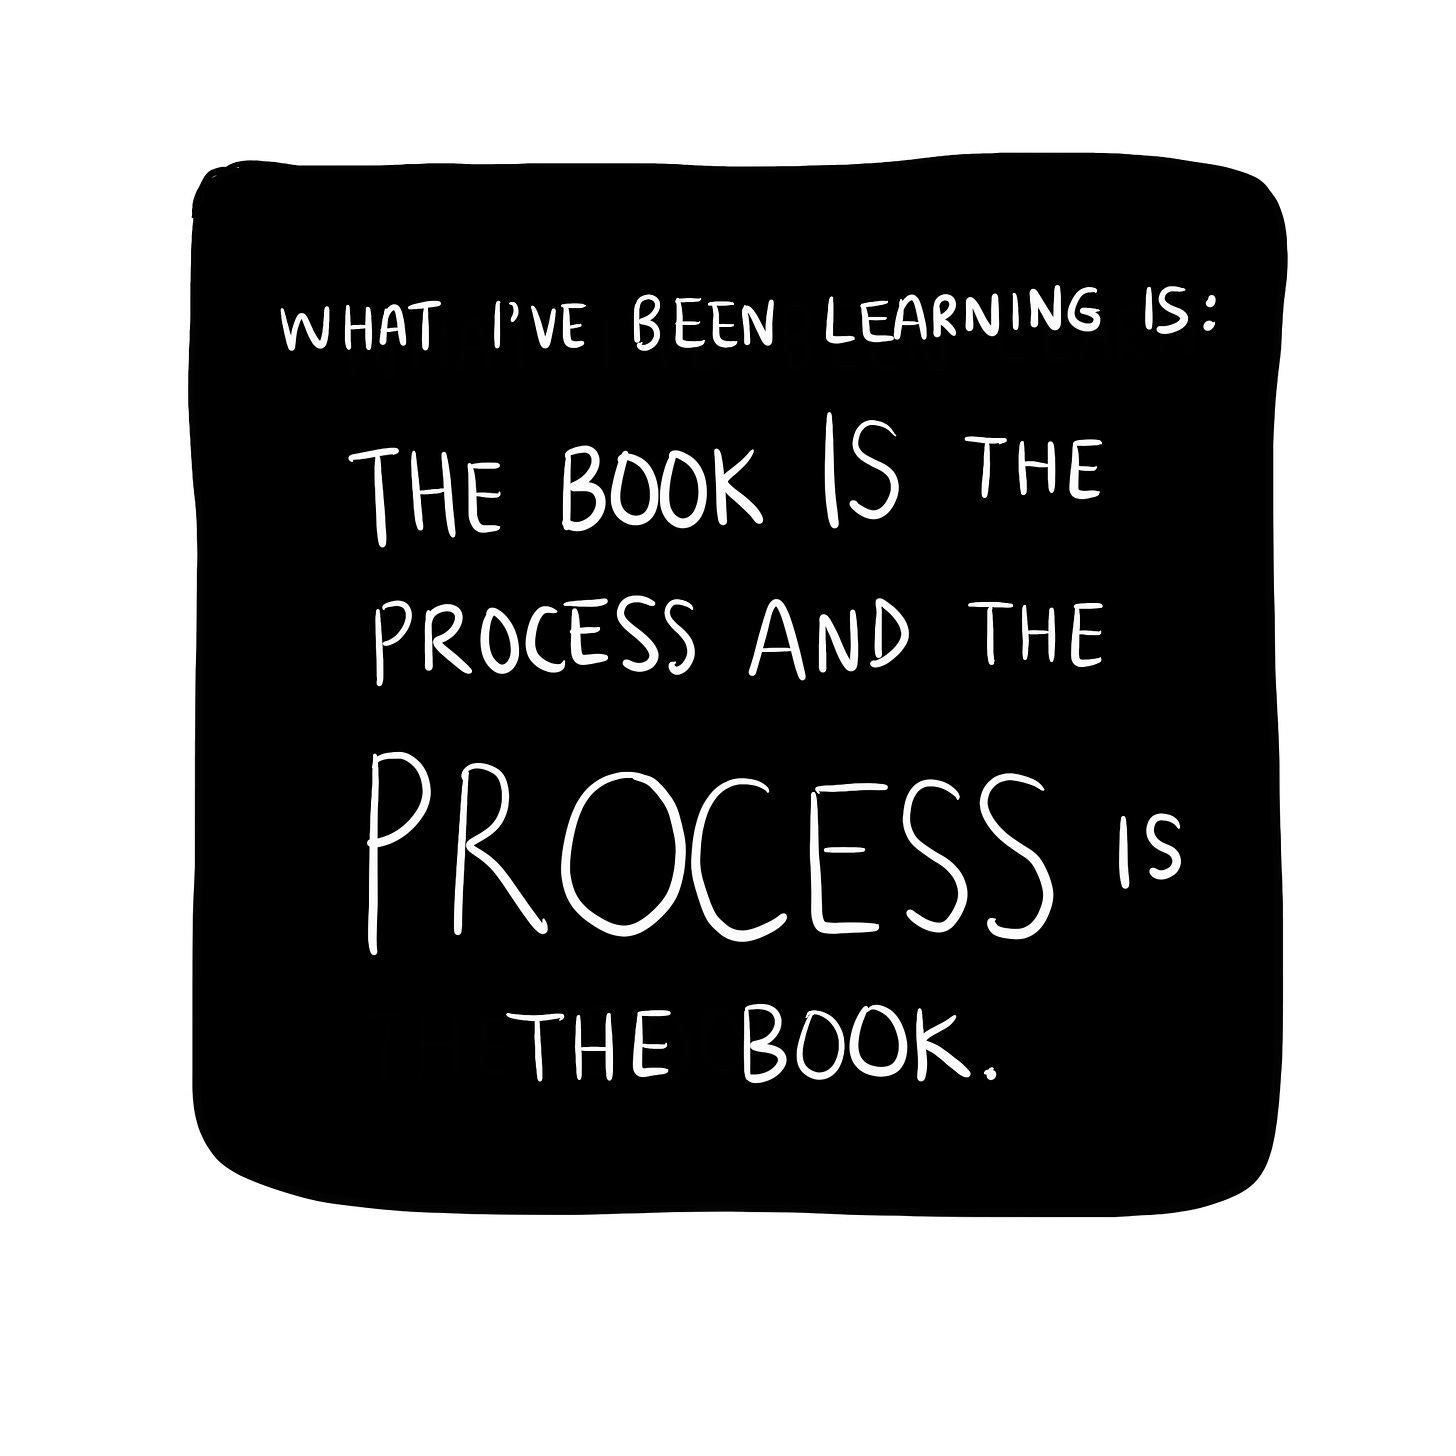 What I've been learning is: the book is the process and the process is the book